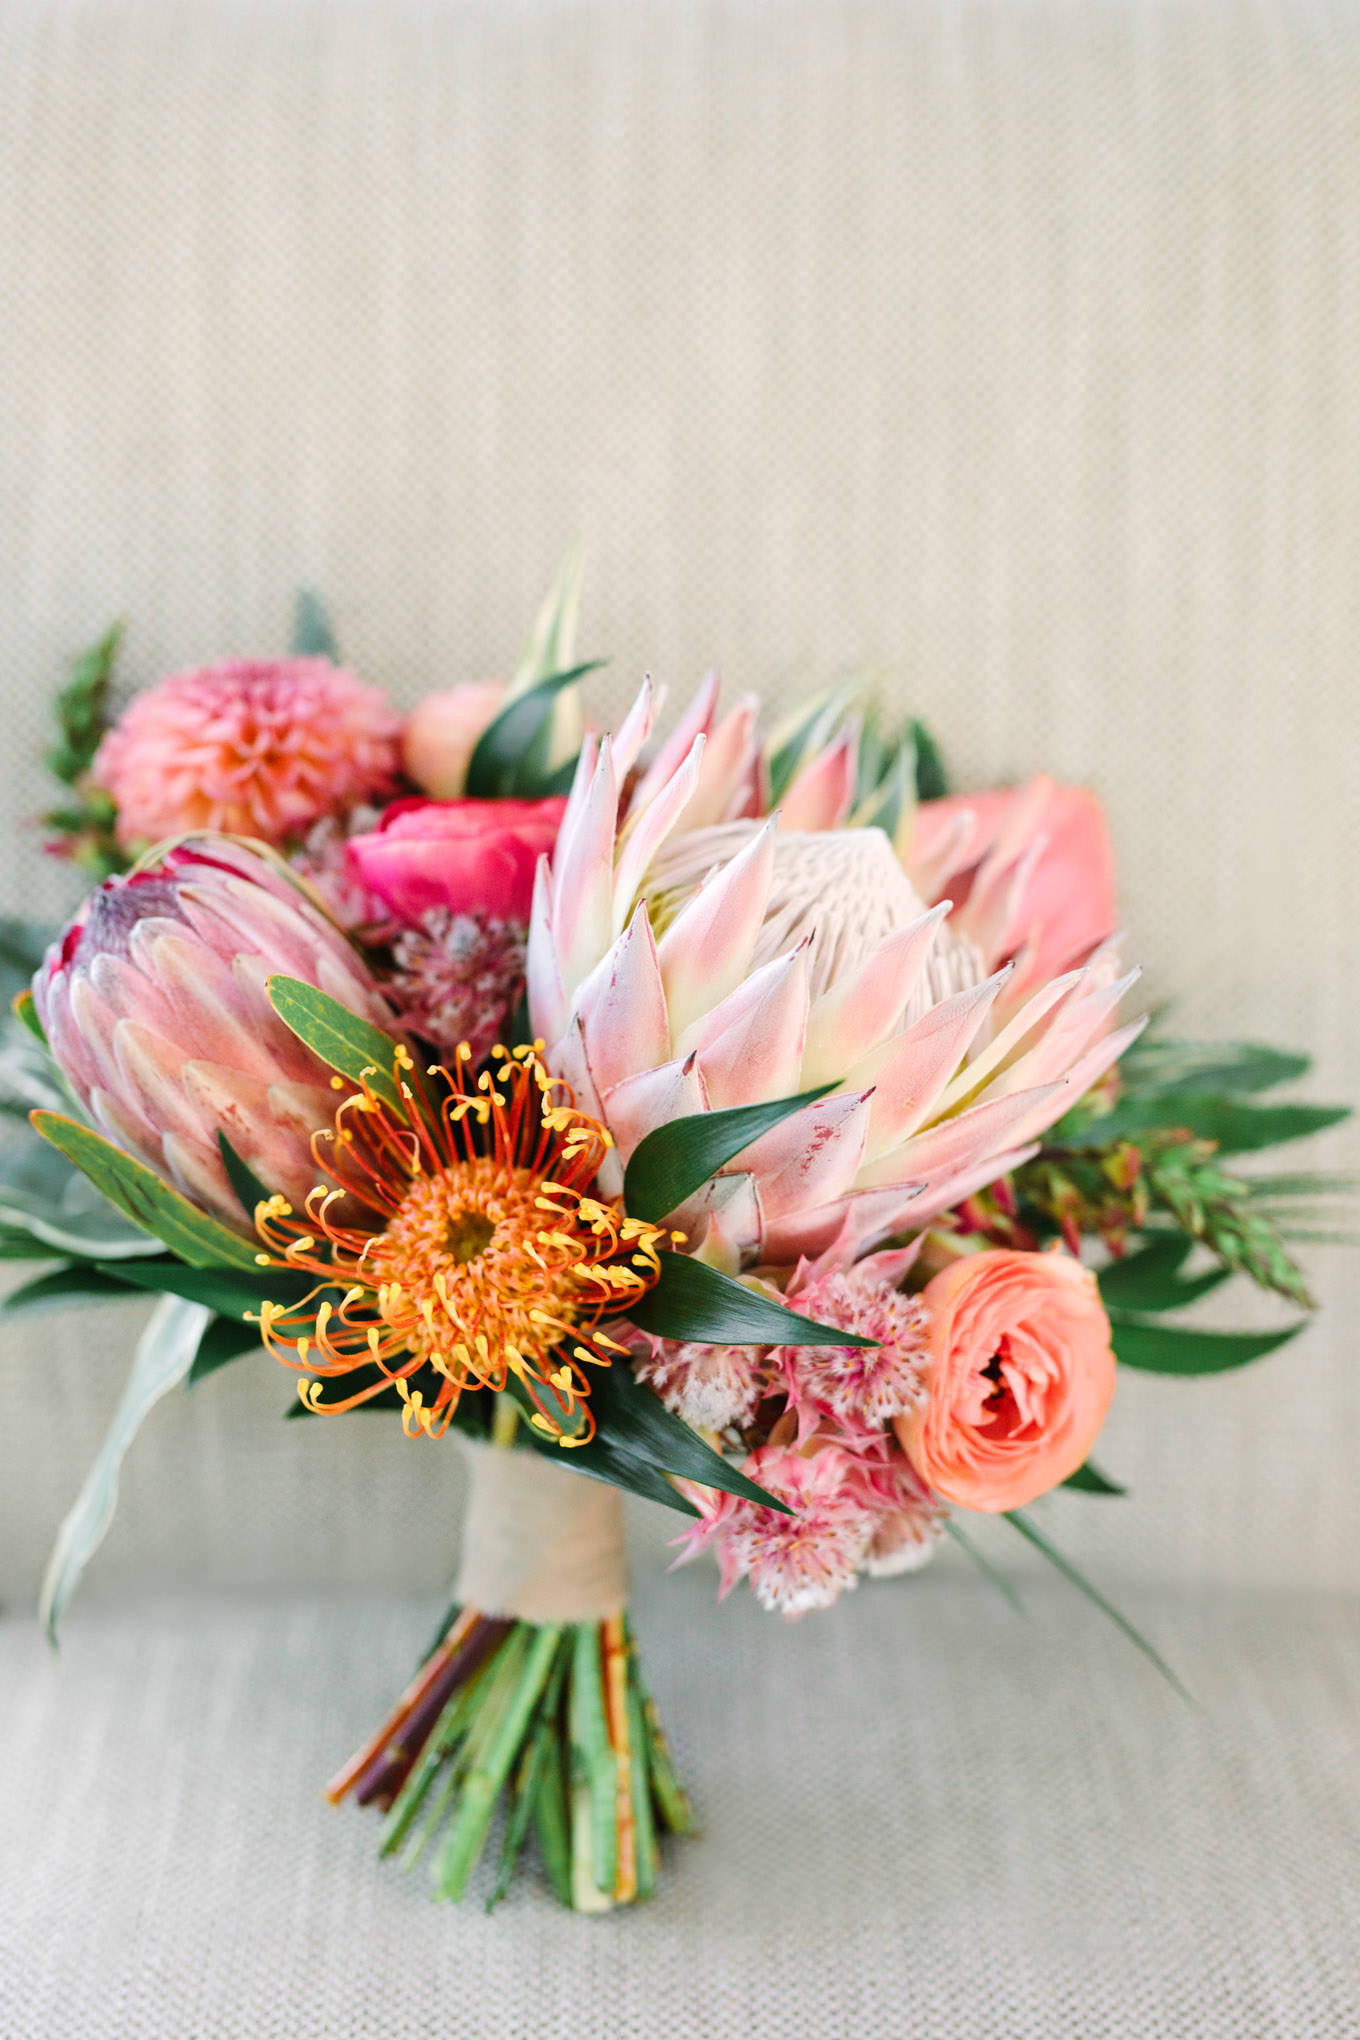 Tropical protea bouquet | Engagement, elopement, and wedding photography roundup of Mary Costa’s favorite images from 2020 | Colorful and elevated photography for fun-loving couples in Southern California | #2020wedding #elopement #weddingphoto #weddingphotography   Source: Mary Costa Photography | Los Angeles